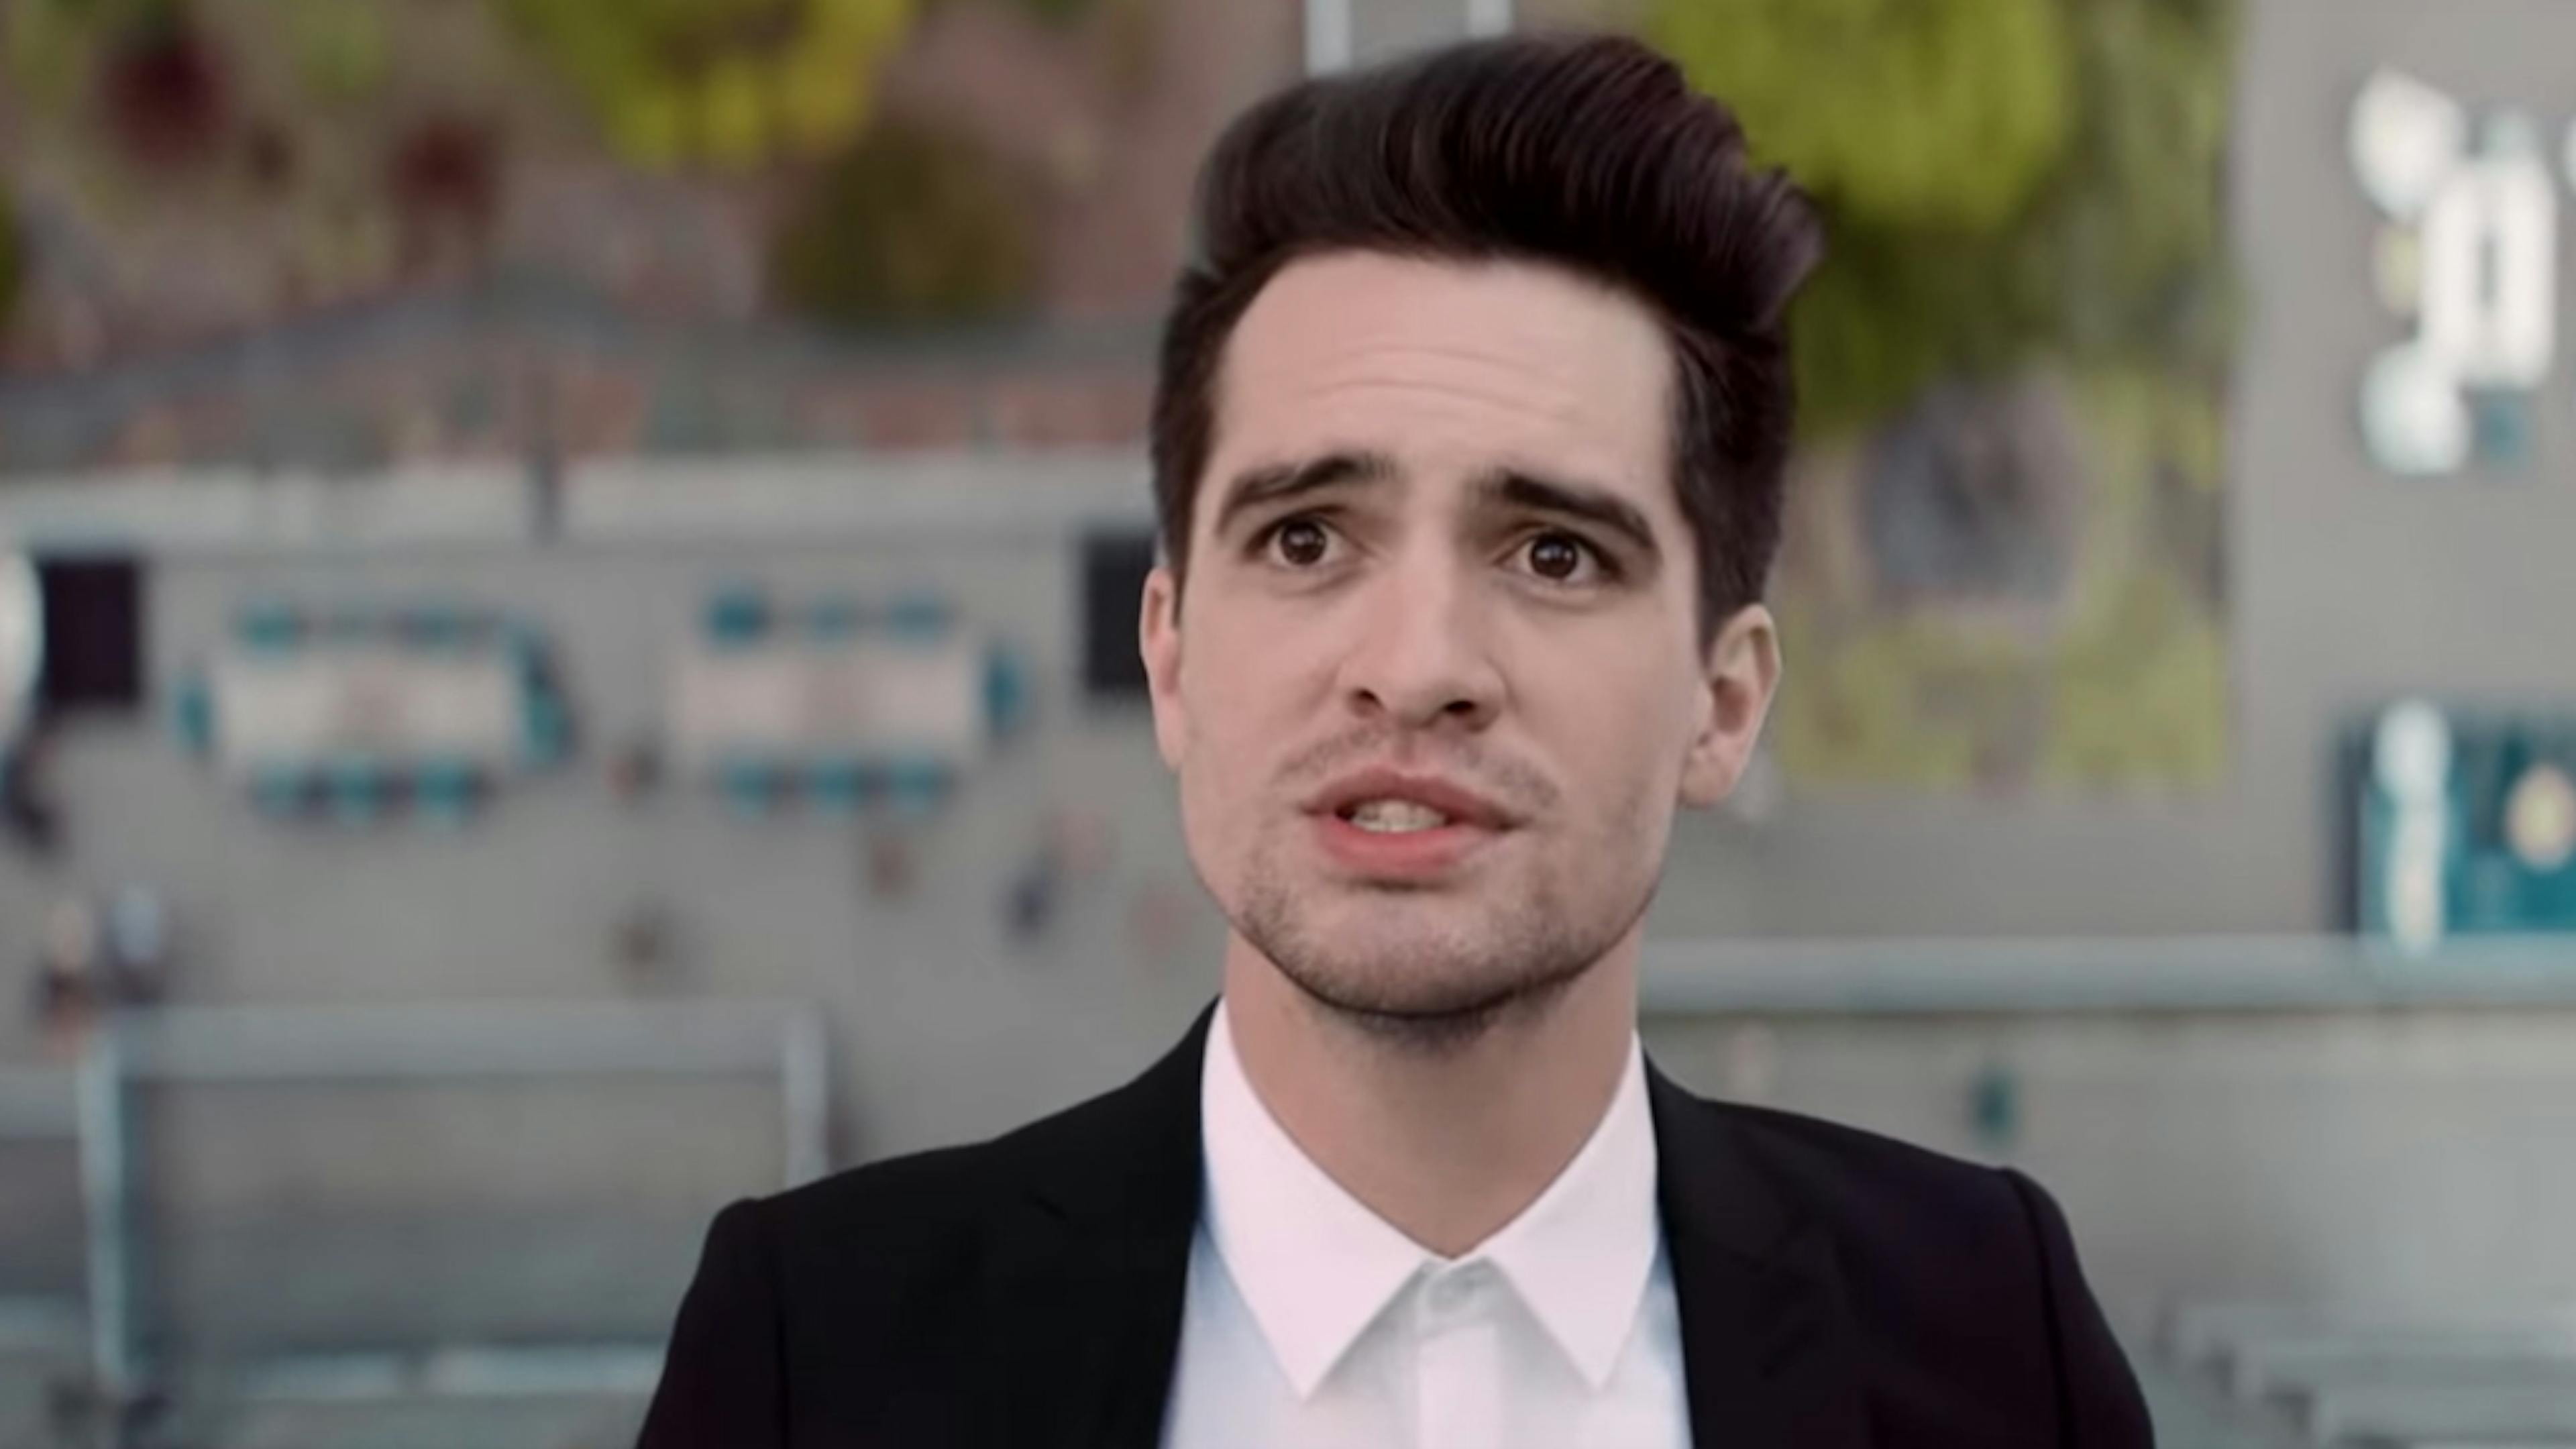 Watch Panic! At The Disco's High Hopes Soundtrack Dancing On Ice's First-Ever Same-Sex Routine